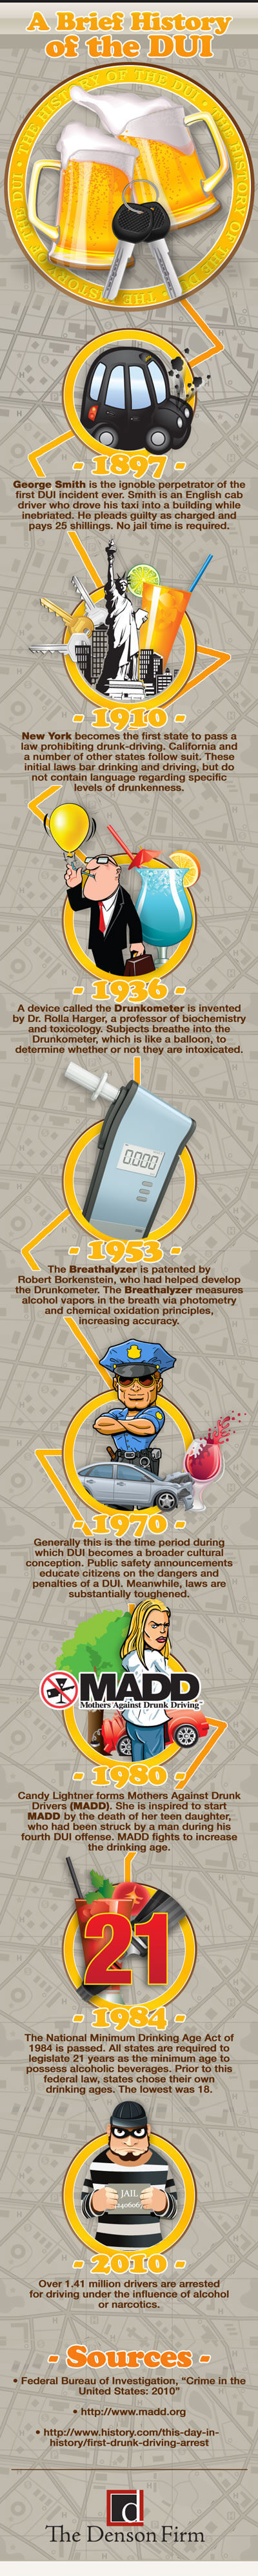 history_dui_infographic_blog